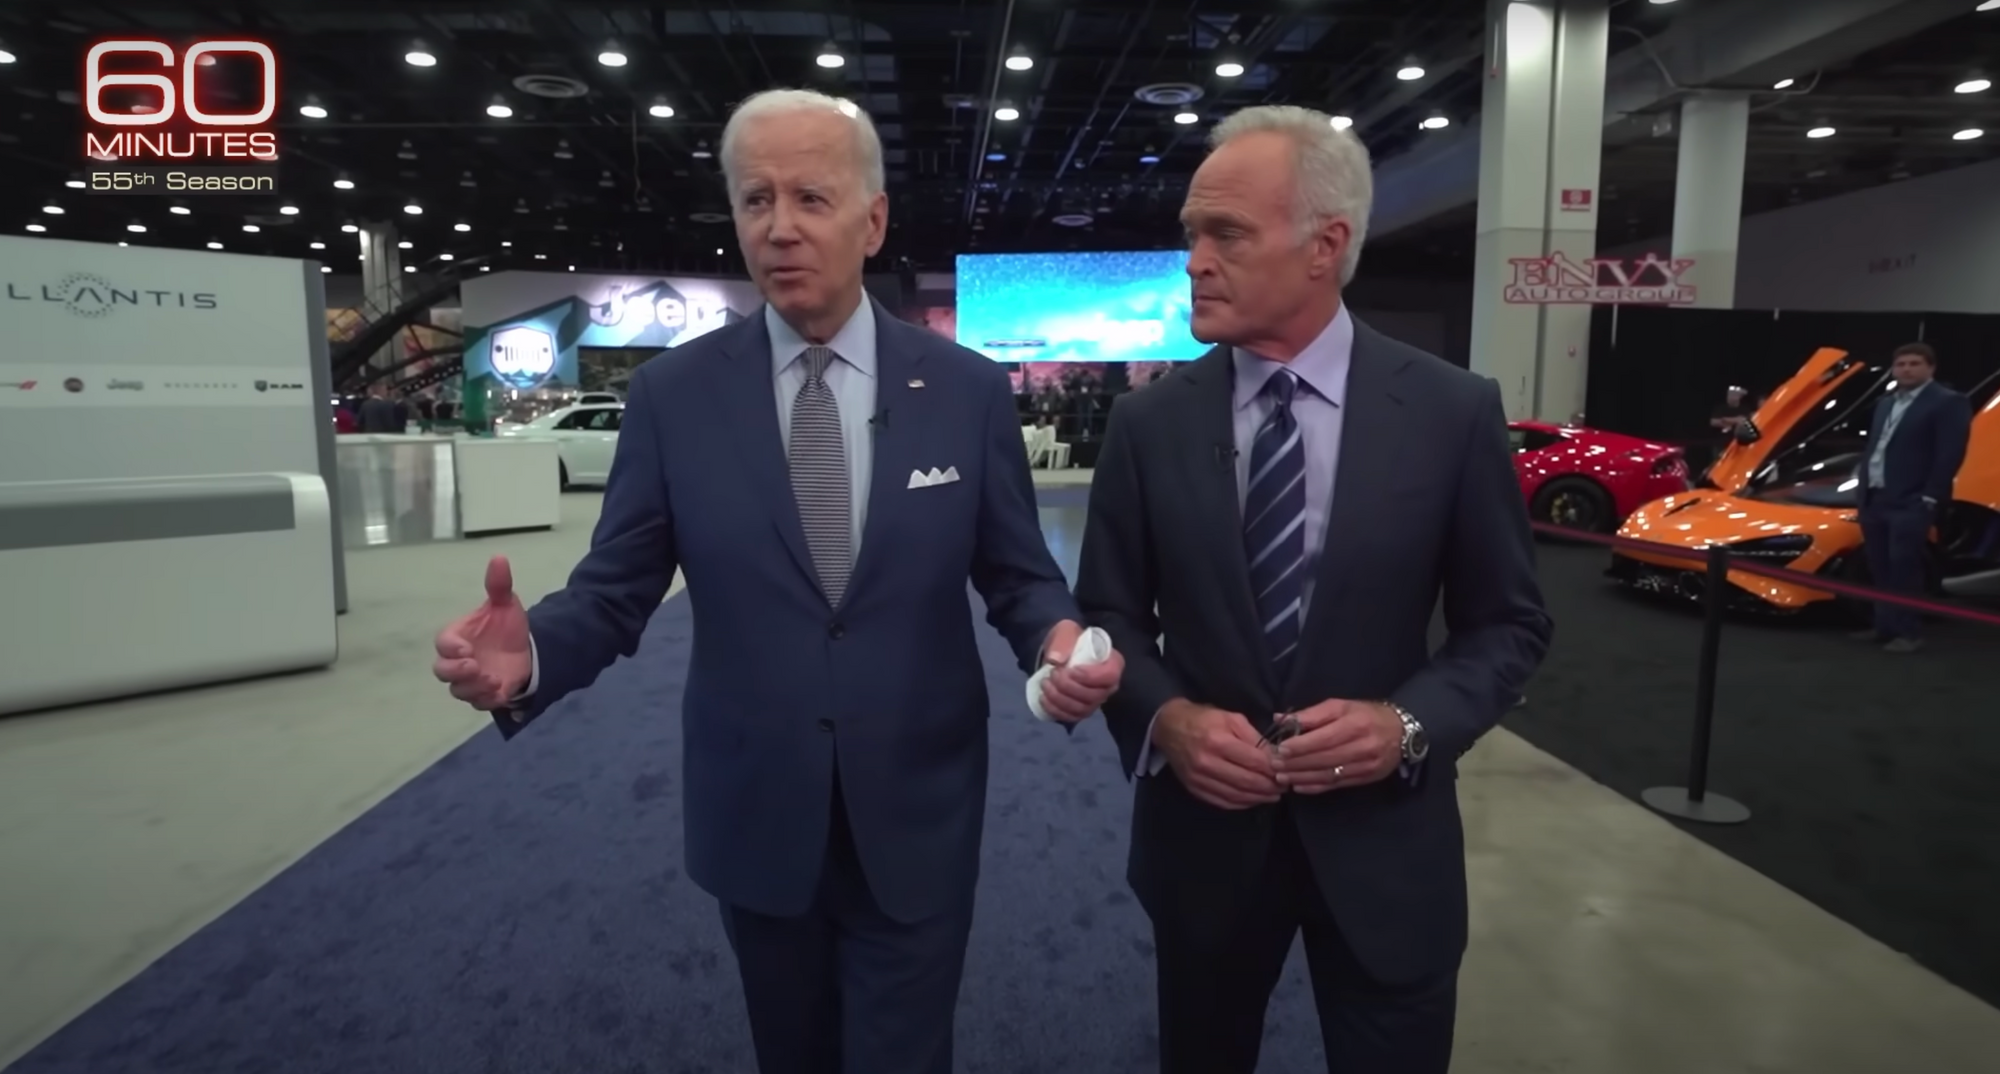 The moment Biden, with Scott Pelley, made his newsworth comments. Screenshot: 60 Minutes